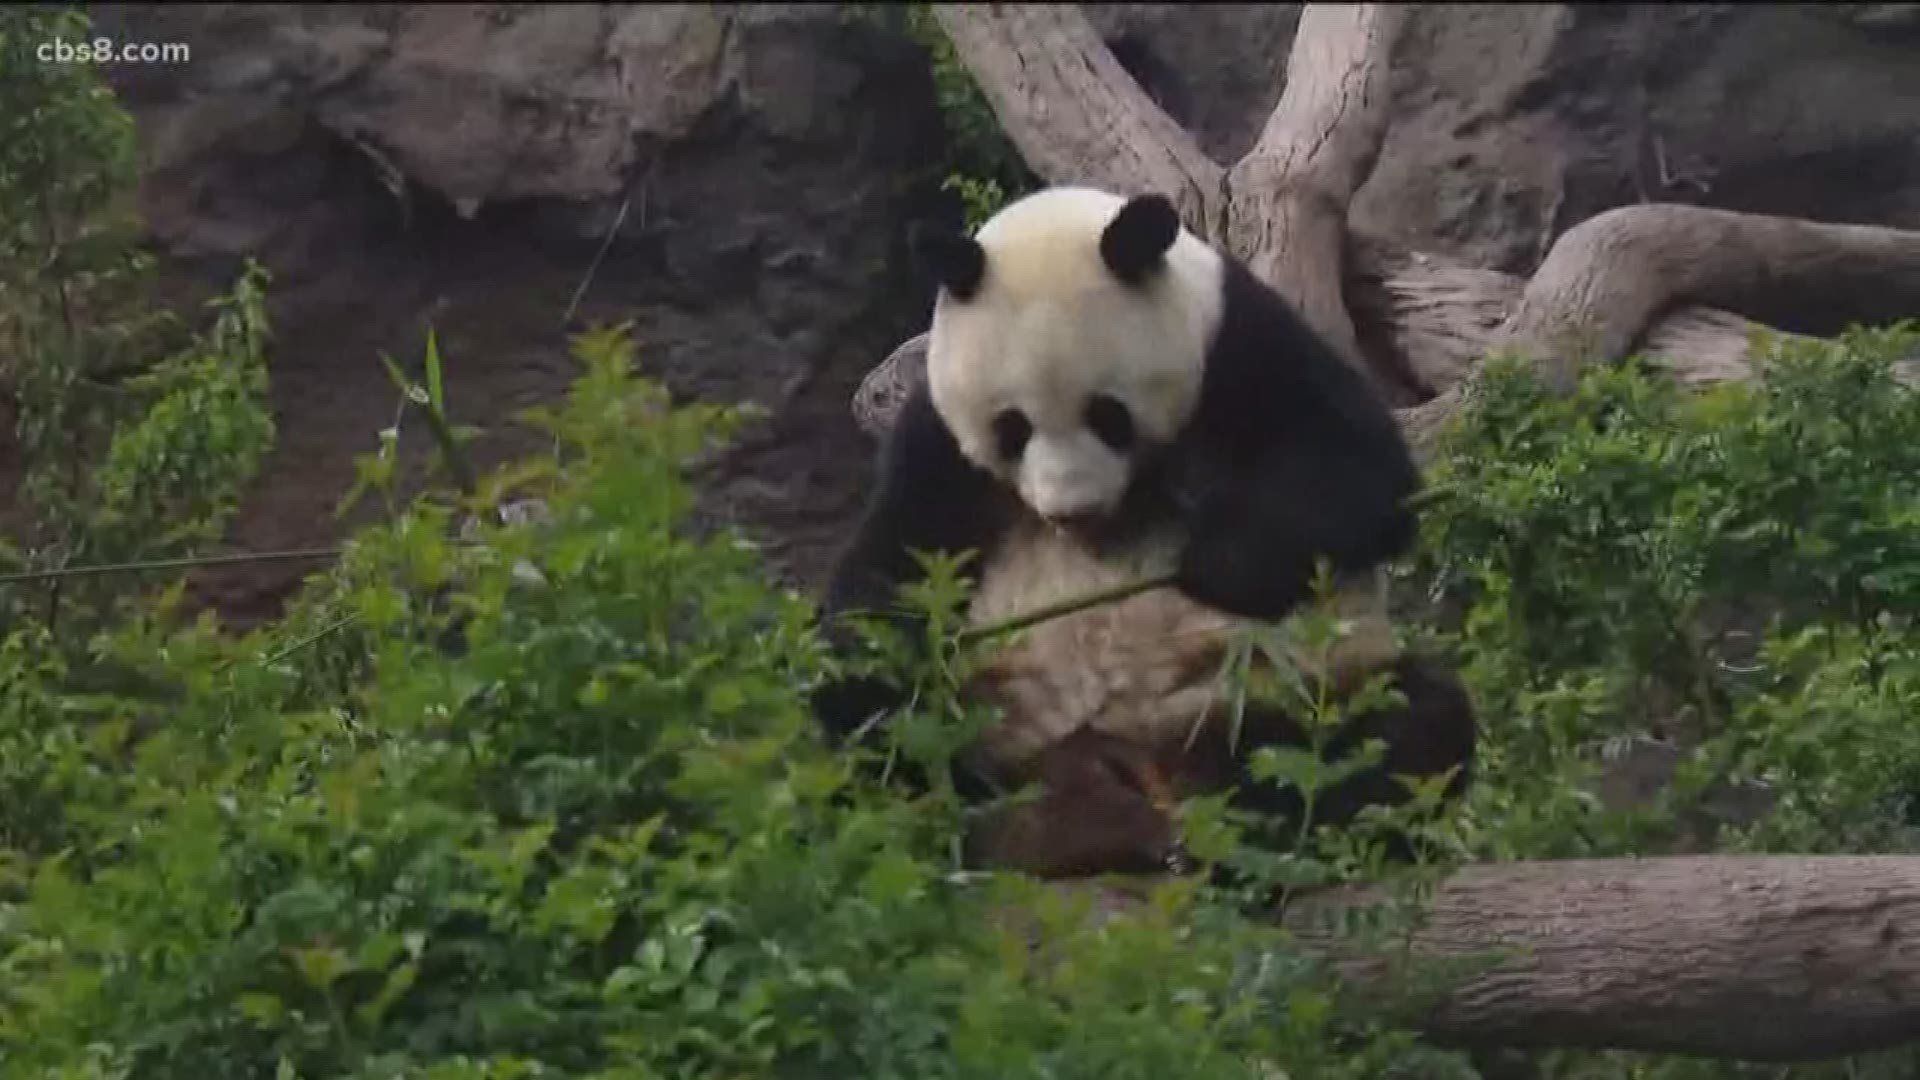 Visitors to the San Diego Zoo have two extra days to say farewell to 27-year-old giant panda, Bai Yun, and her son, 6-year-old Xiao Liwu who will be repatriated to China this spring.